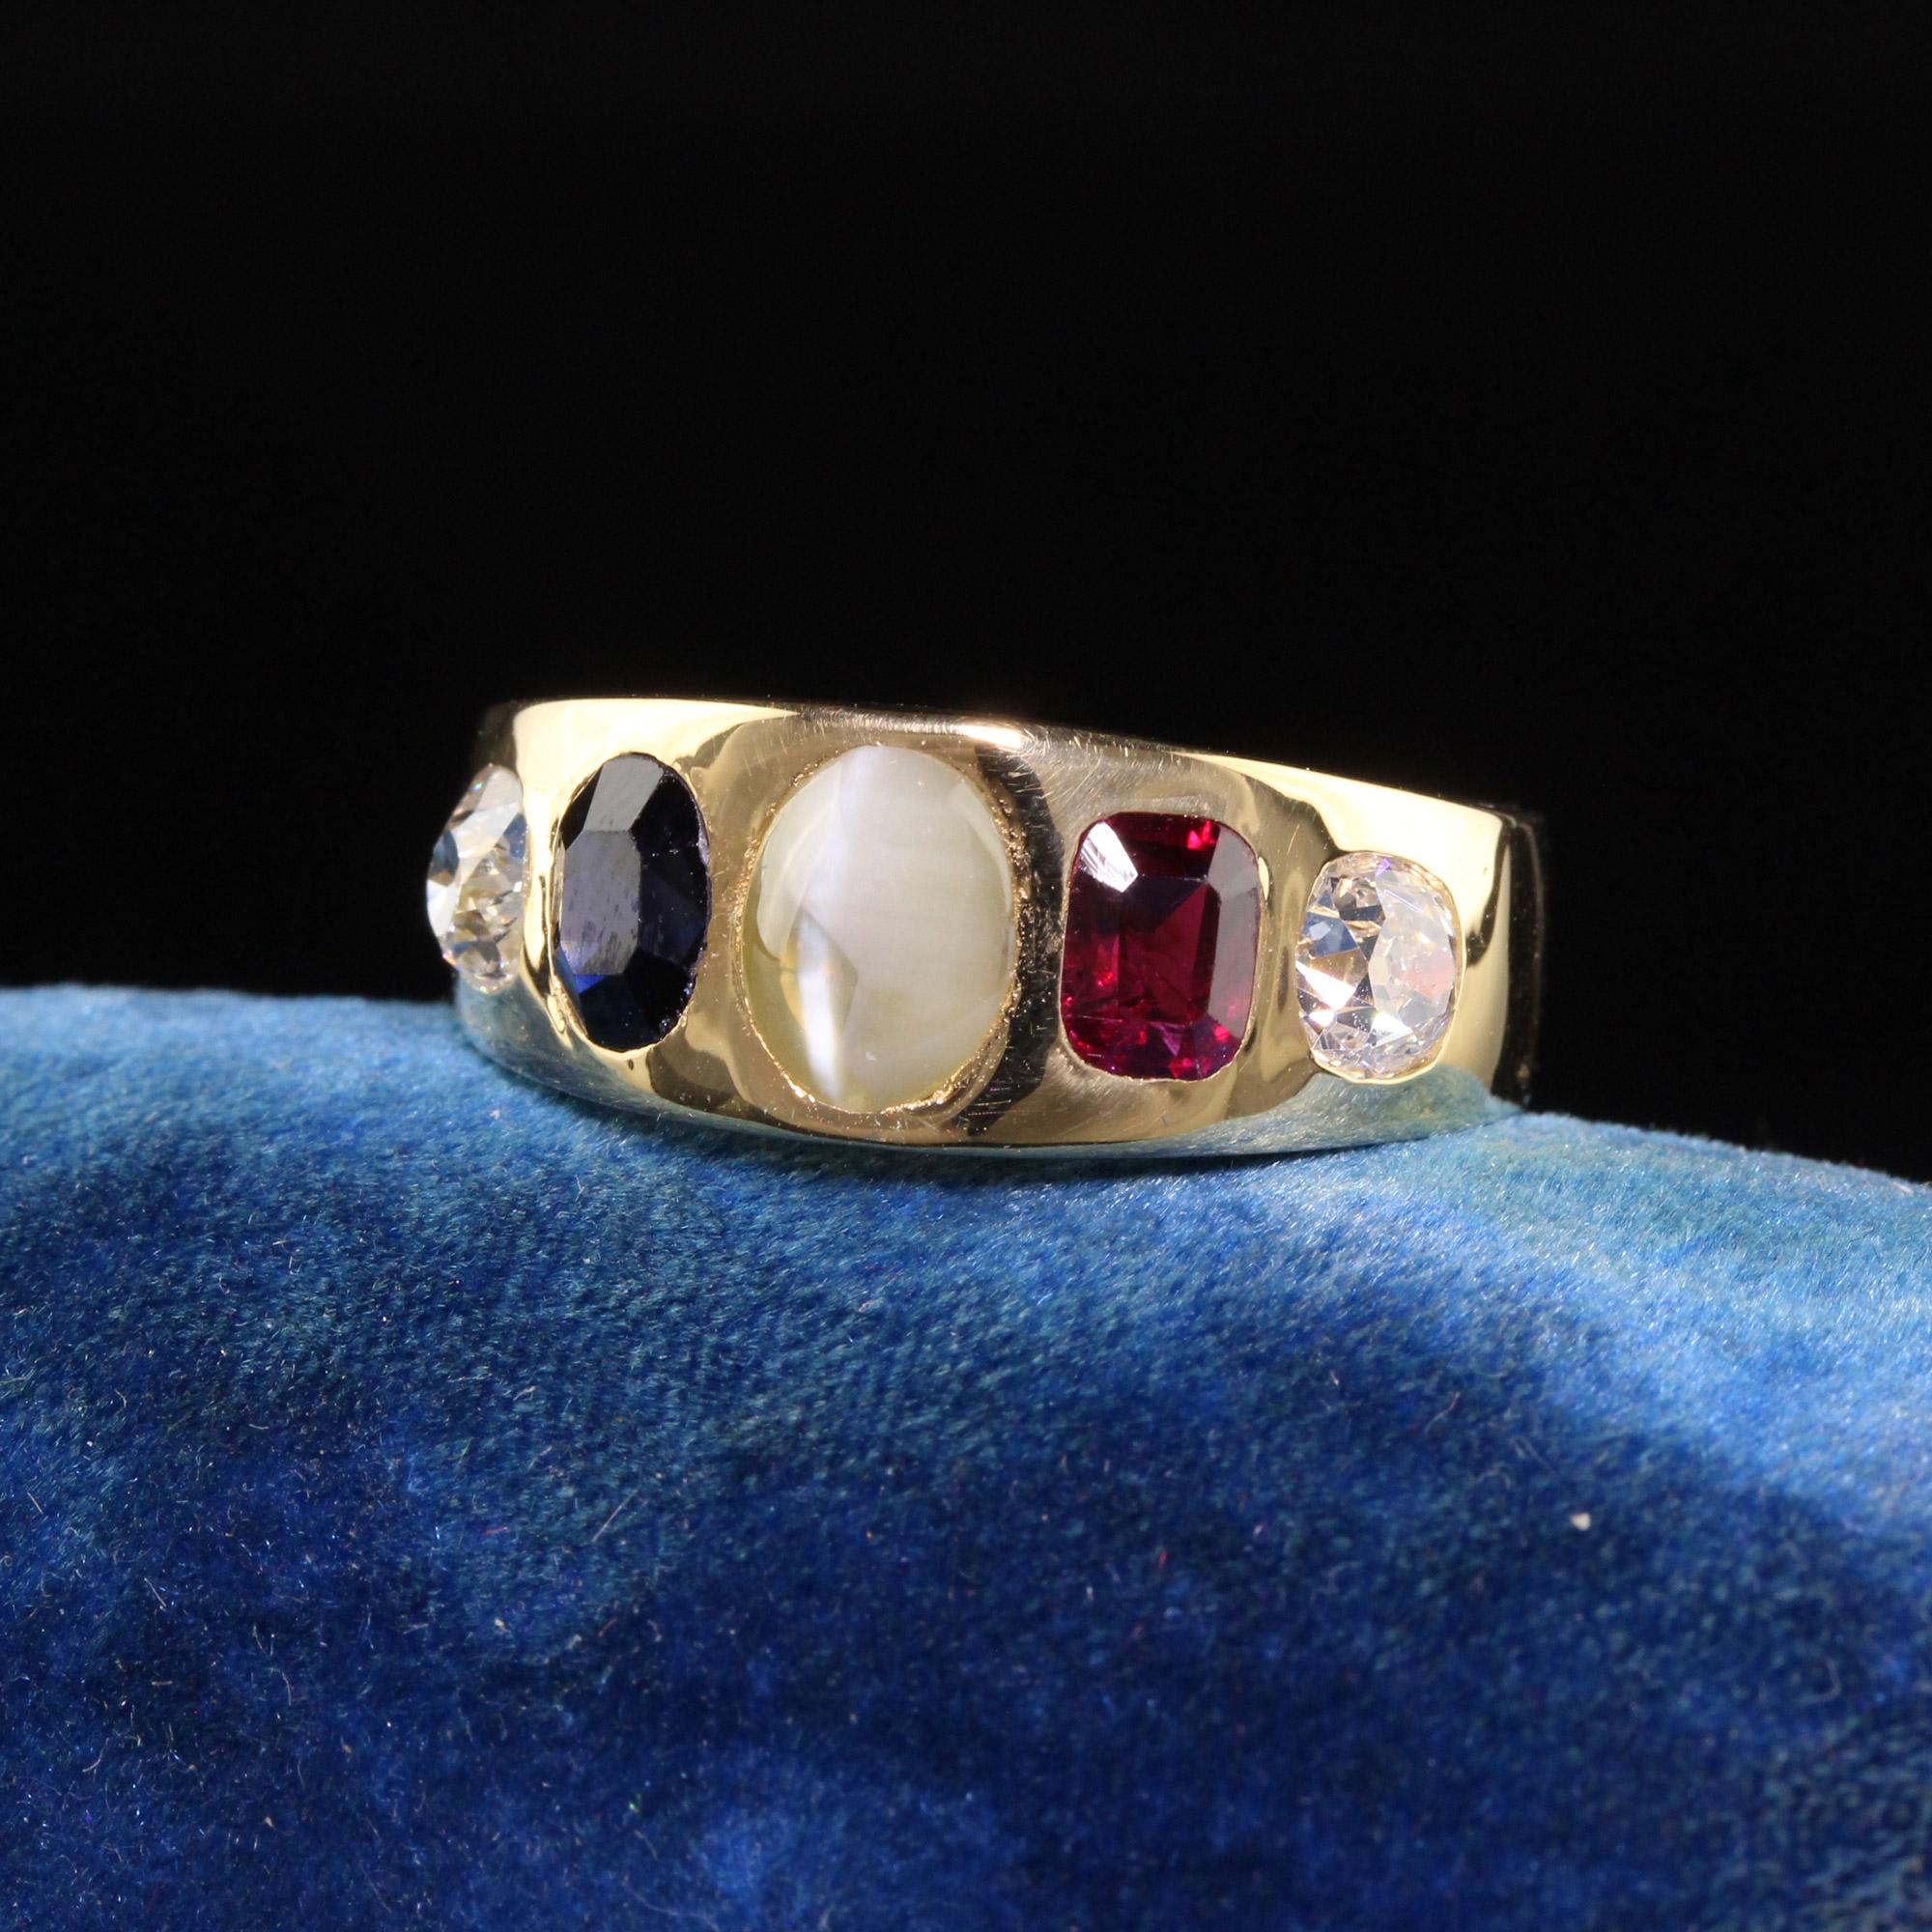 Beautiful Antique Victorian 18K Yellow Gold Old Mine Diamond Ruby Sapphire Flush Set Ring. This incredible ring is crafted in 18k yellow gold. The ring has two chunky old mine cut diamonds on the sides with a natural ruby and sapphire and a cats eye